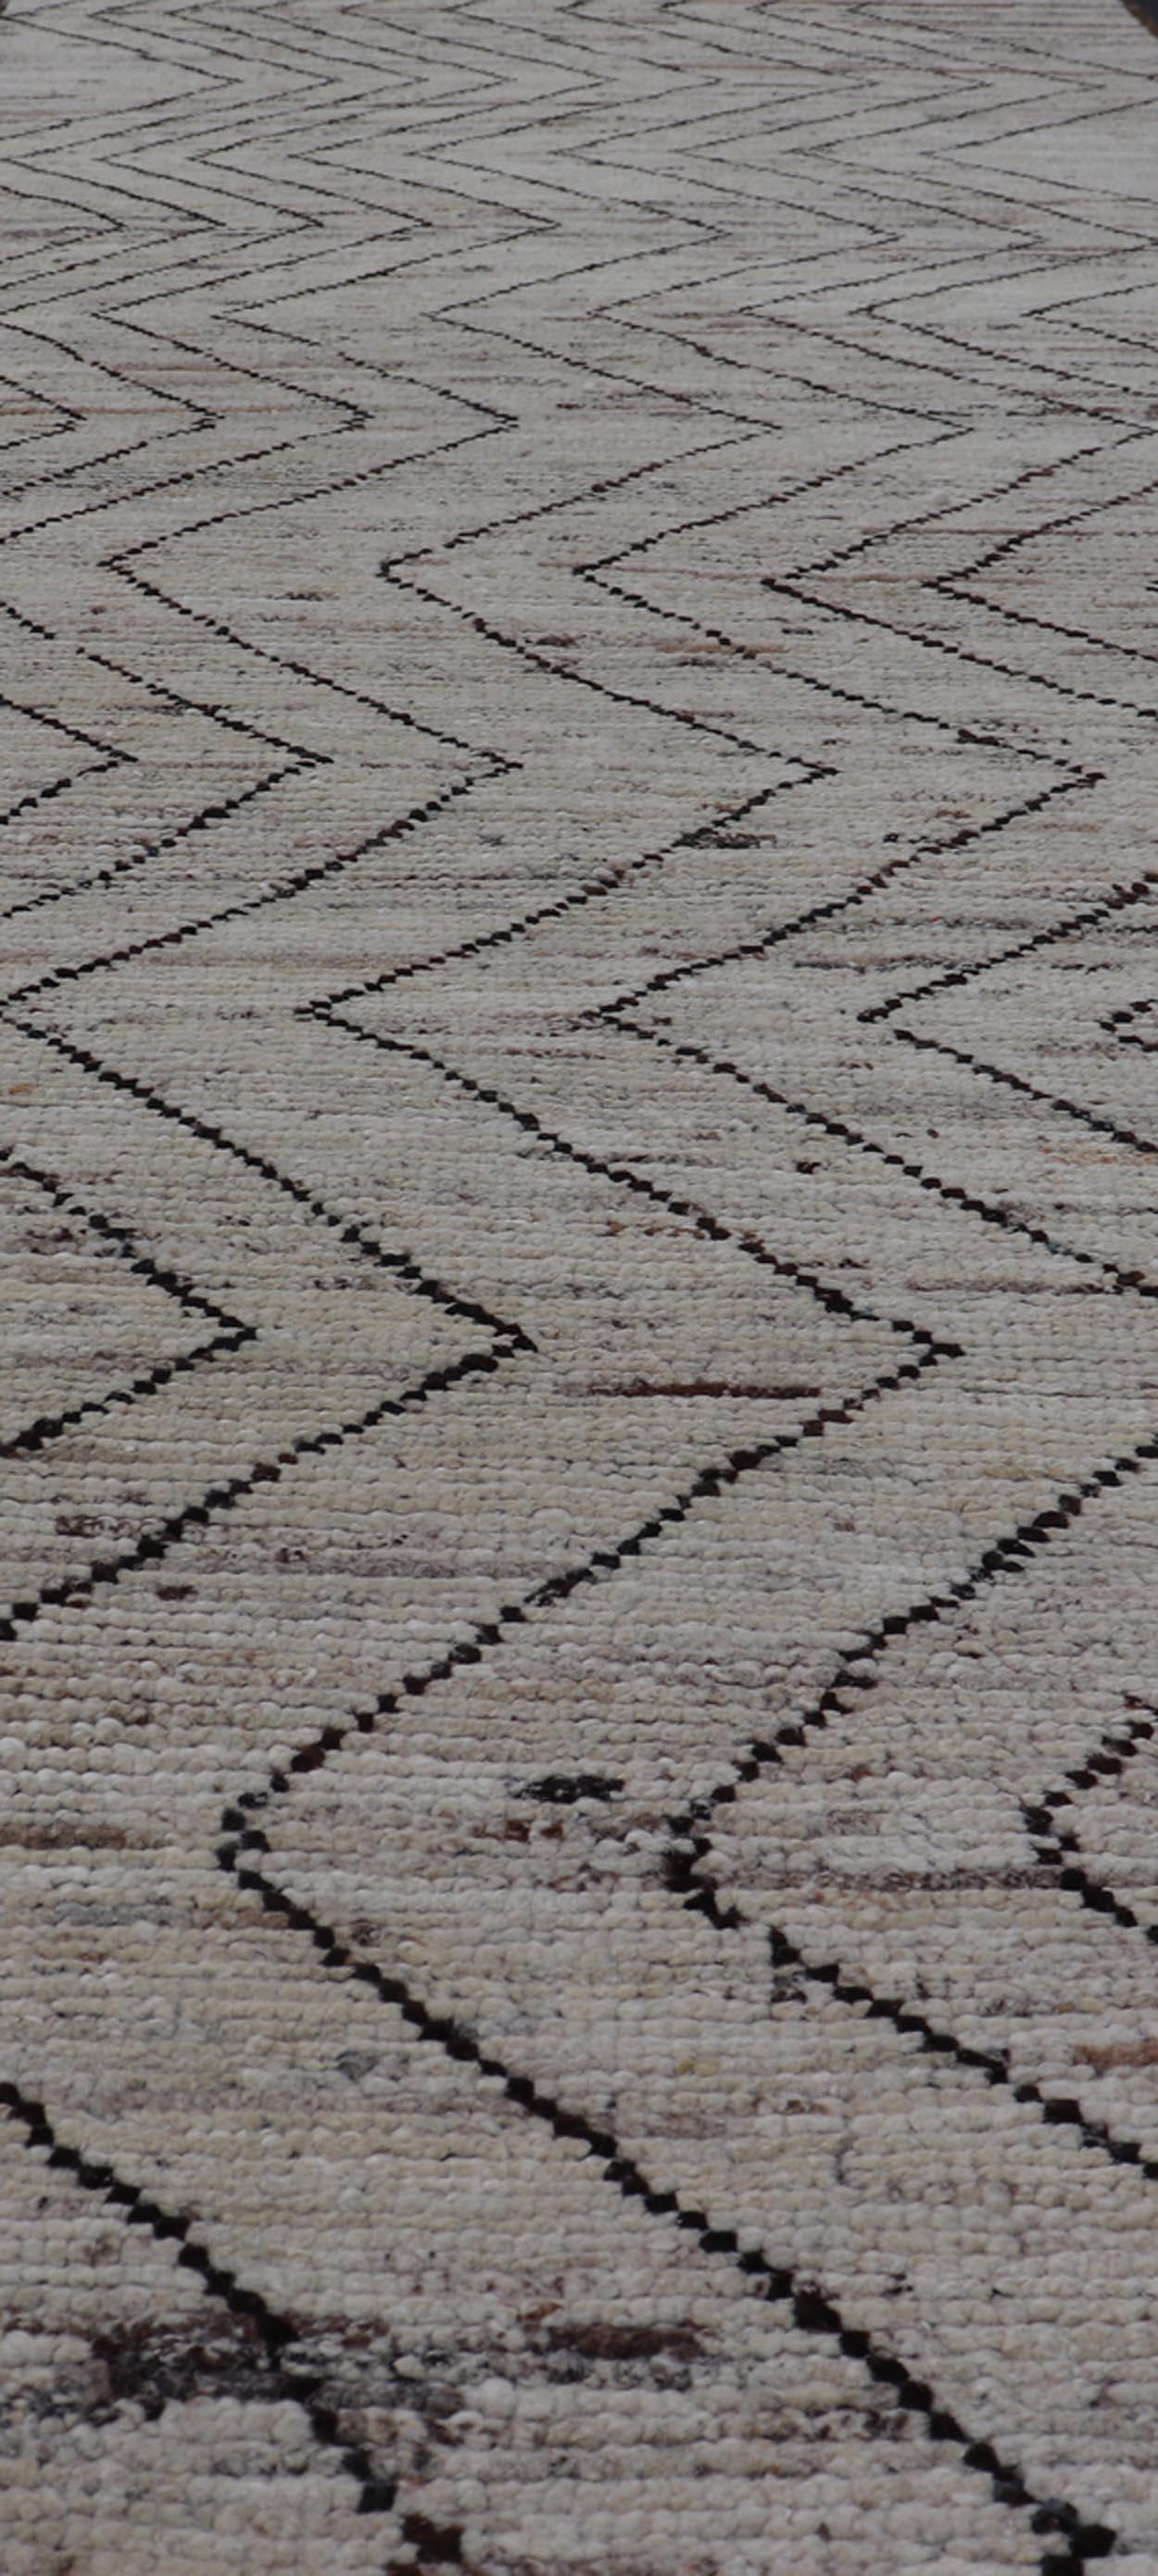 This modern casual runner has been hand-knotted. The rug features a modern sub-geometric zig-zag design, rendered in black and earthy tones, making this rug a superb fit for a variety of classic, modern, casual and minimalist interiors.

Modern